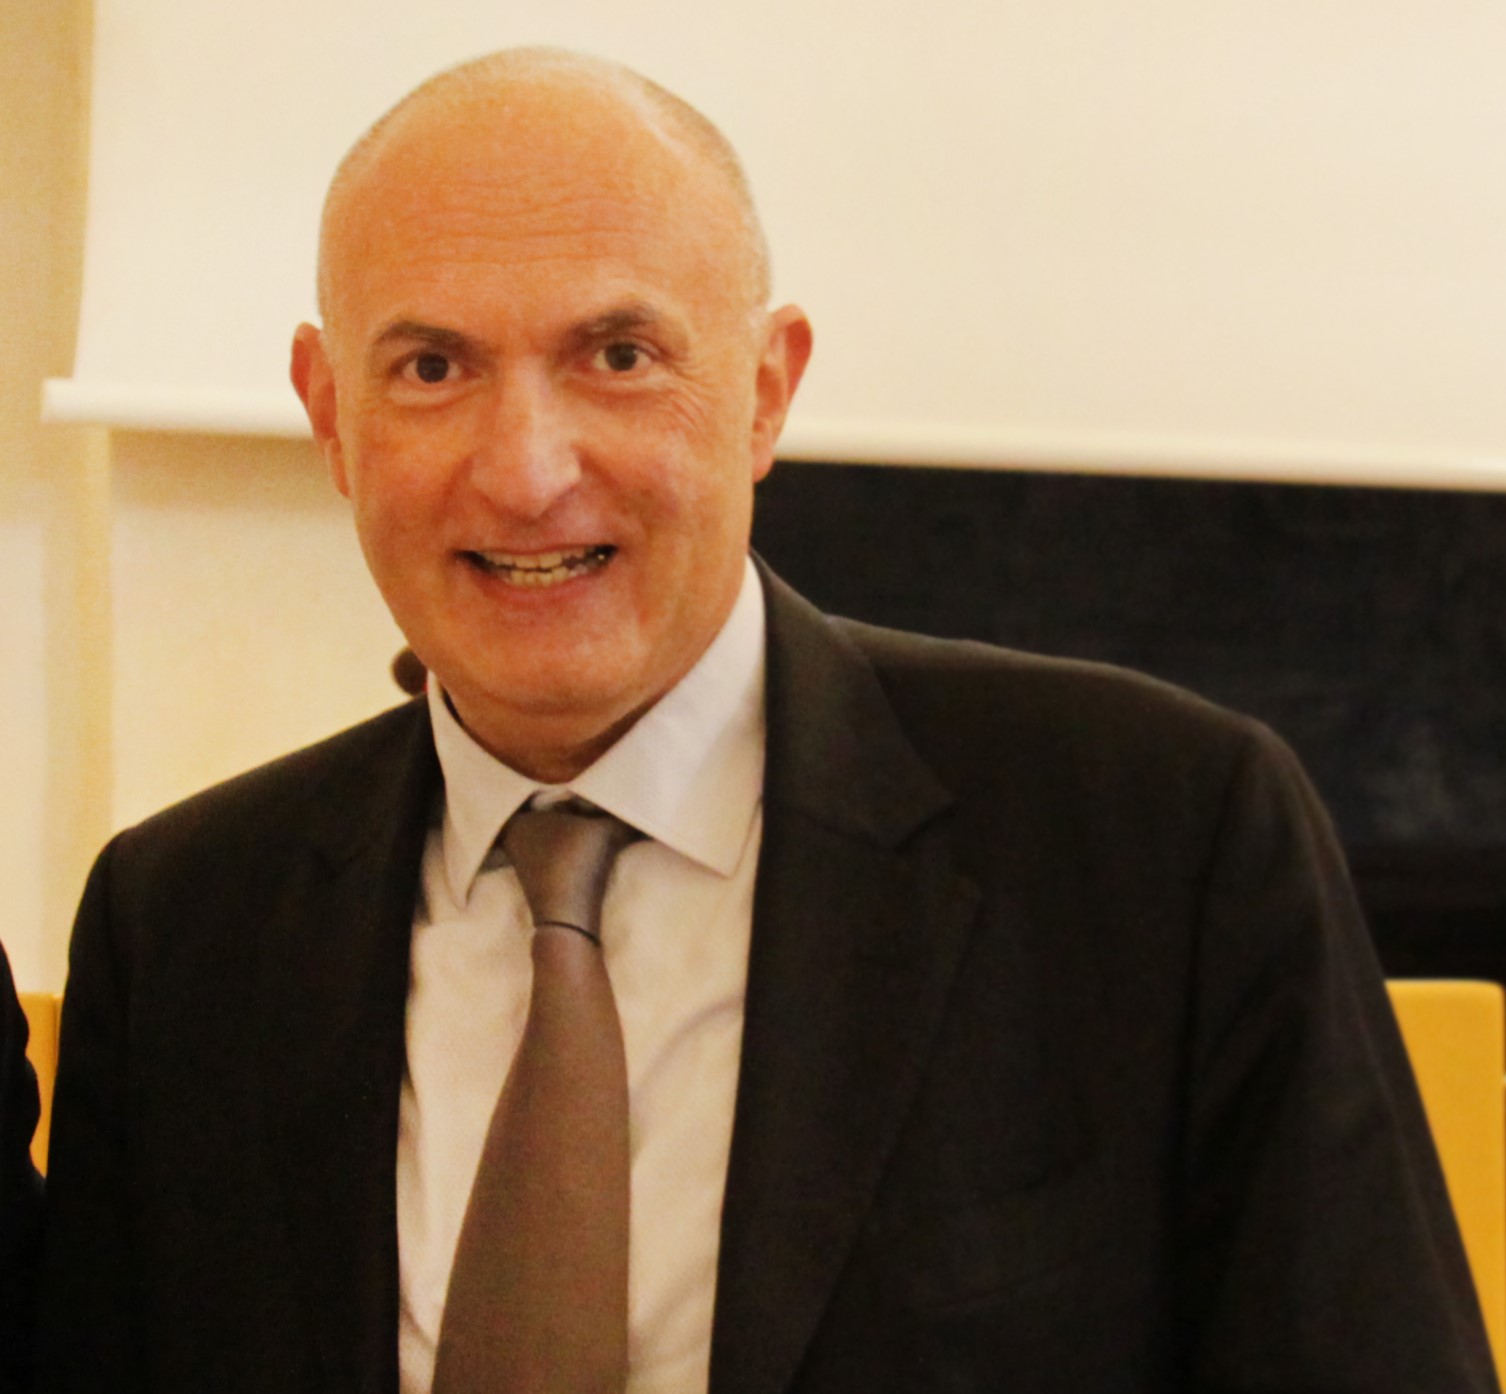 Interview with...Bruno Franchi Chairman of the ANSV - Italian National Agency for Flight Safety